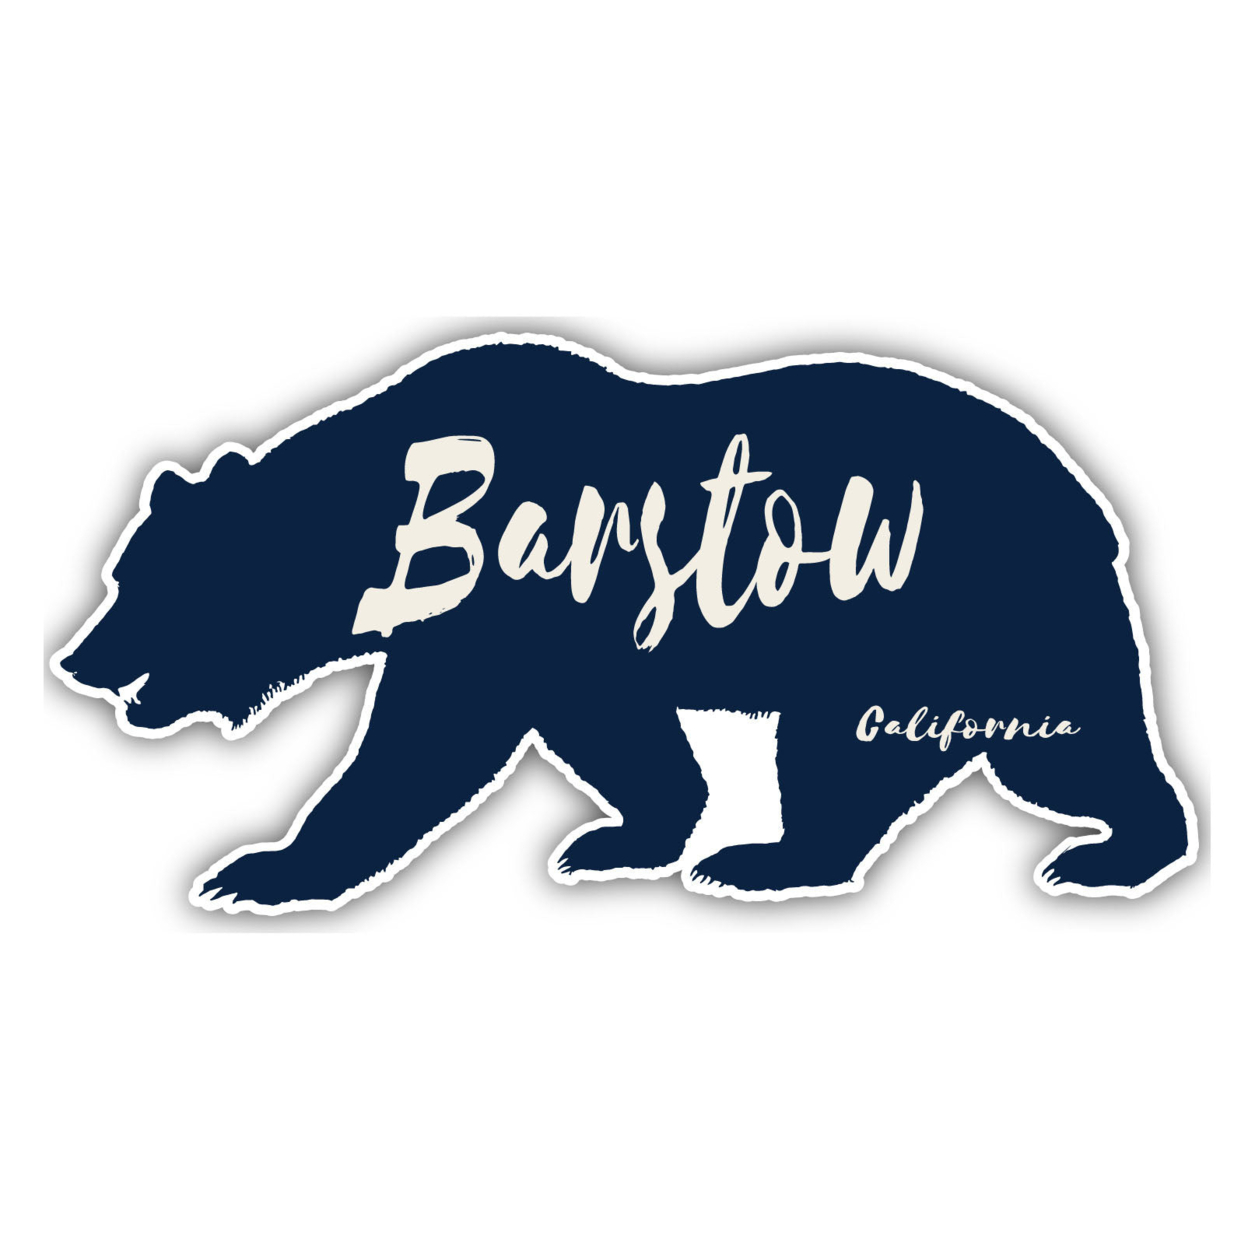 Barstow California Souvenir Decorative Stickers (Choose Theme And Size) - Single Unit, 12-Inch, Bear